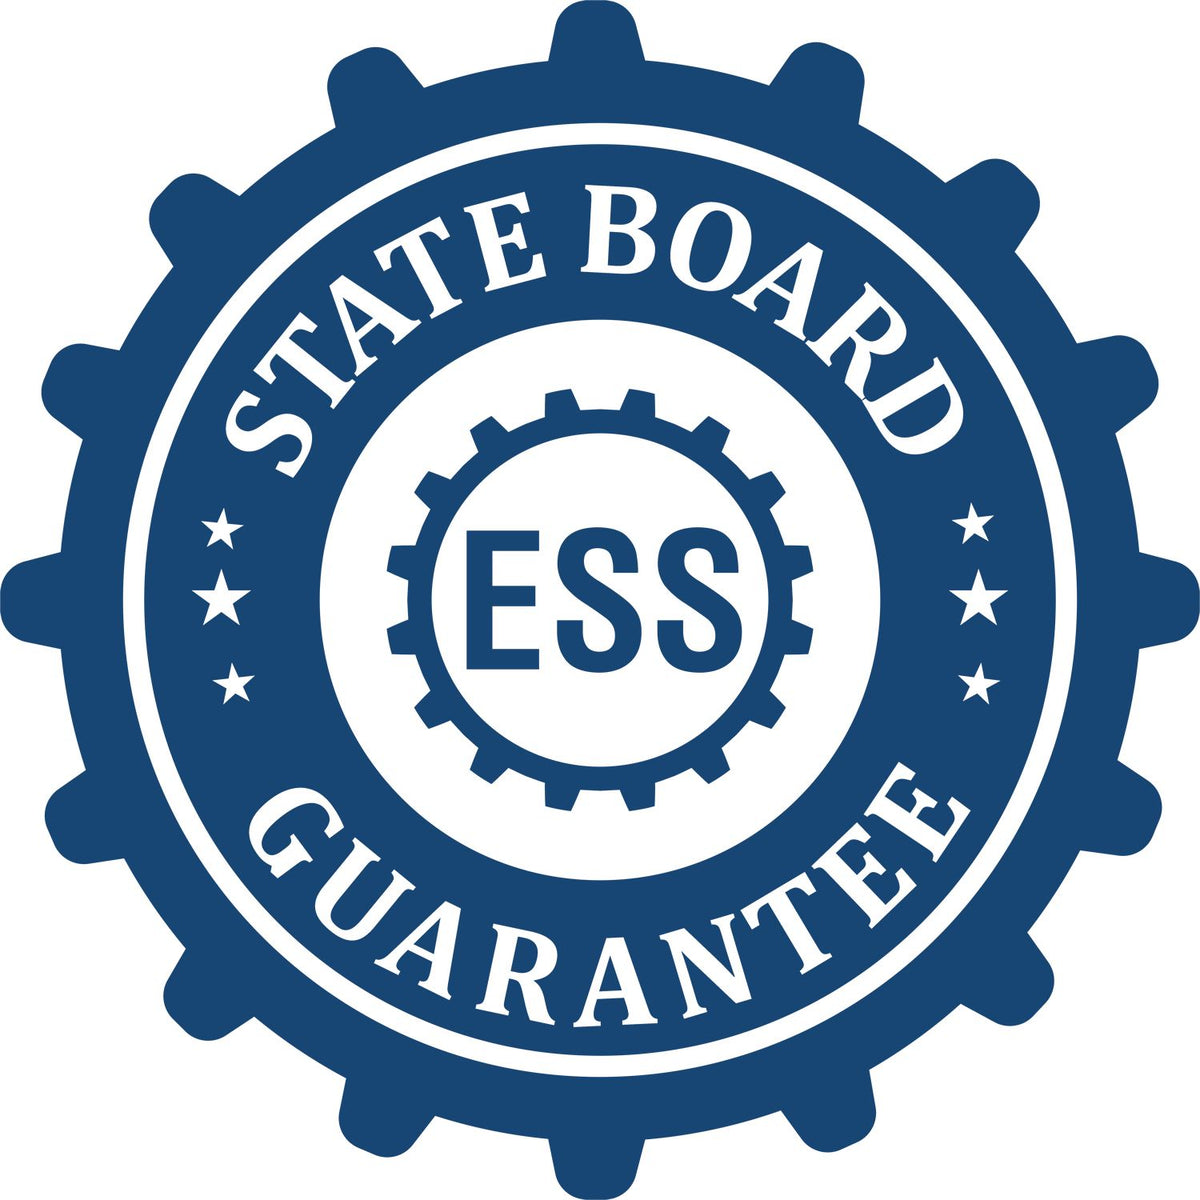 An emblem in a gear shape illustrating a state board guarantee for the Texas Engineer Desk Seal product.